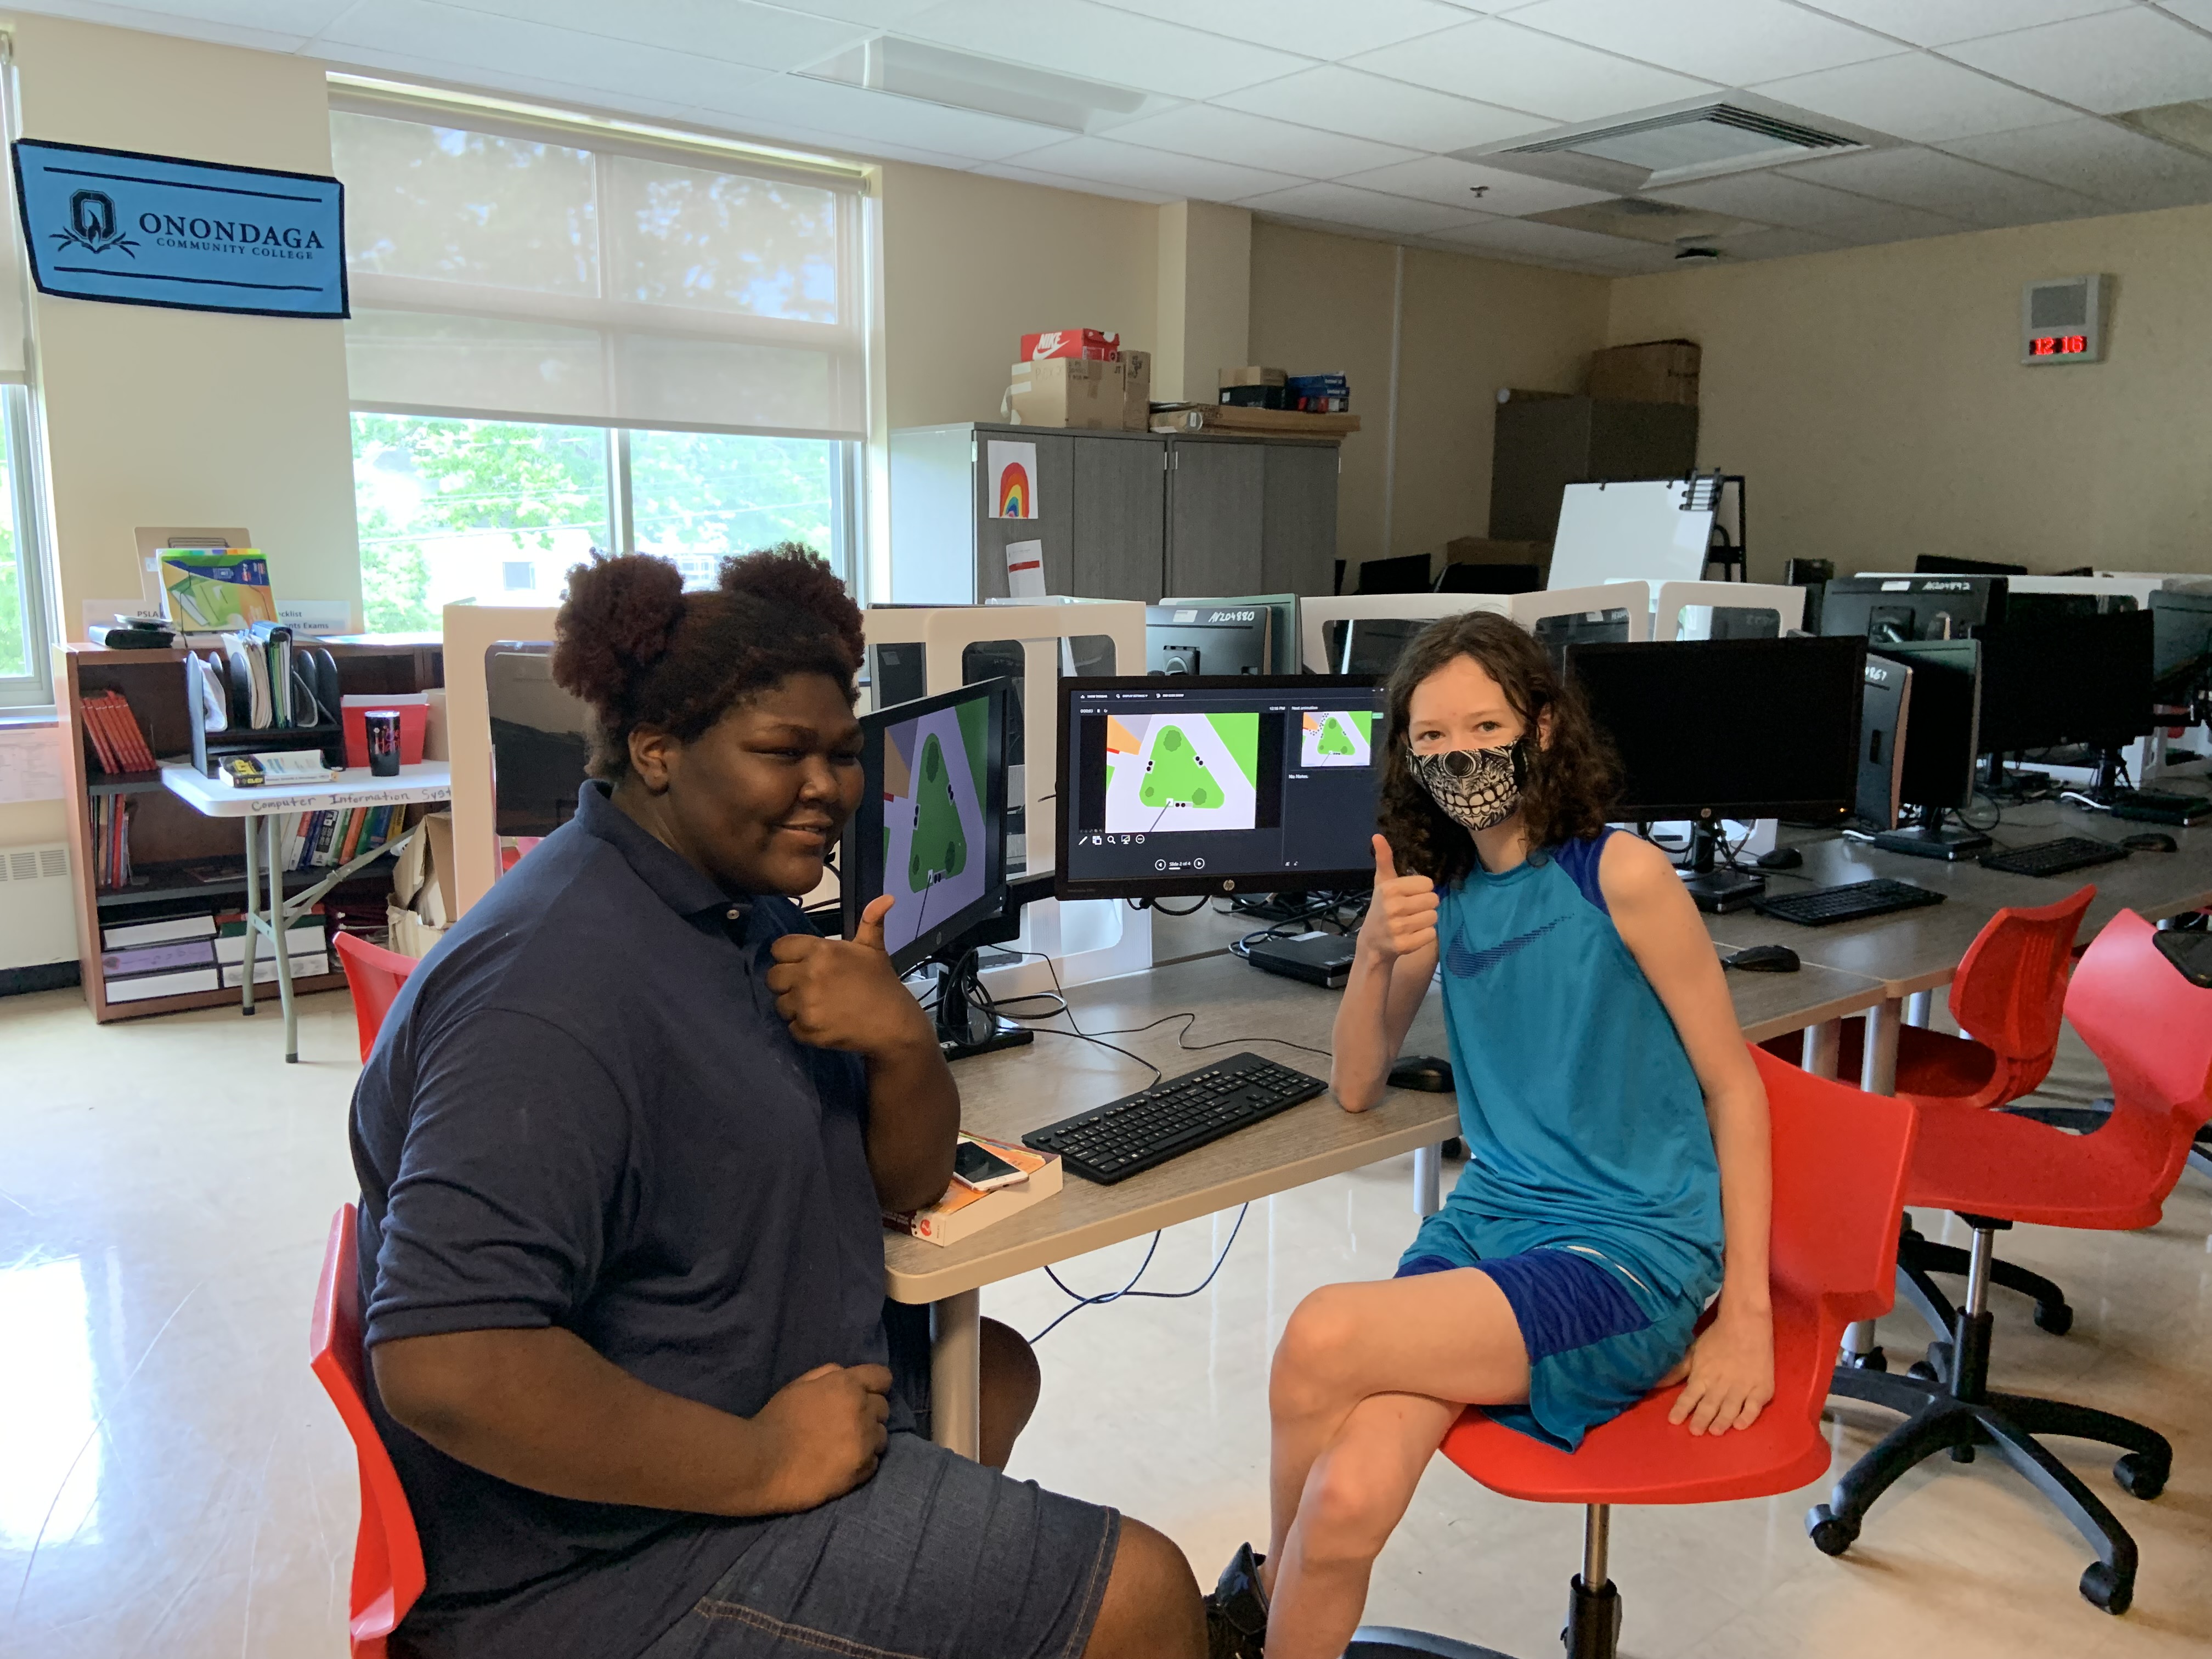 This is a photo of two PSLA students sitting next to a computer smiling at the camera while giving 'thumbs up' signals